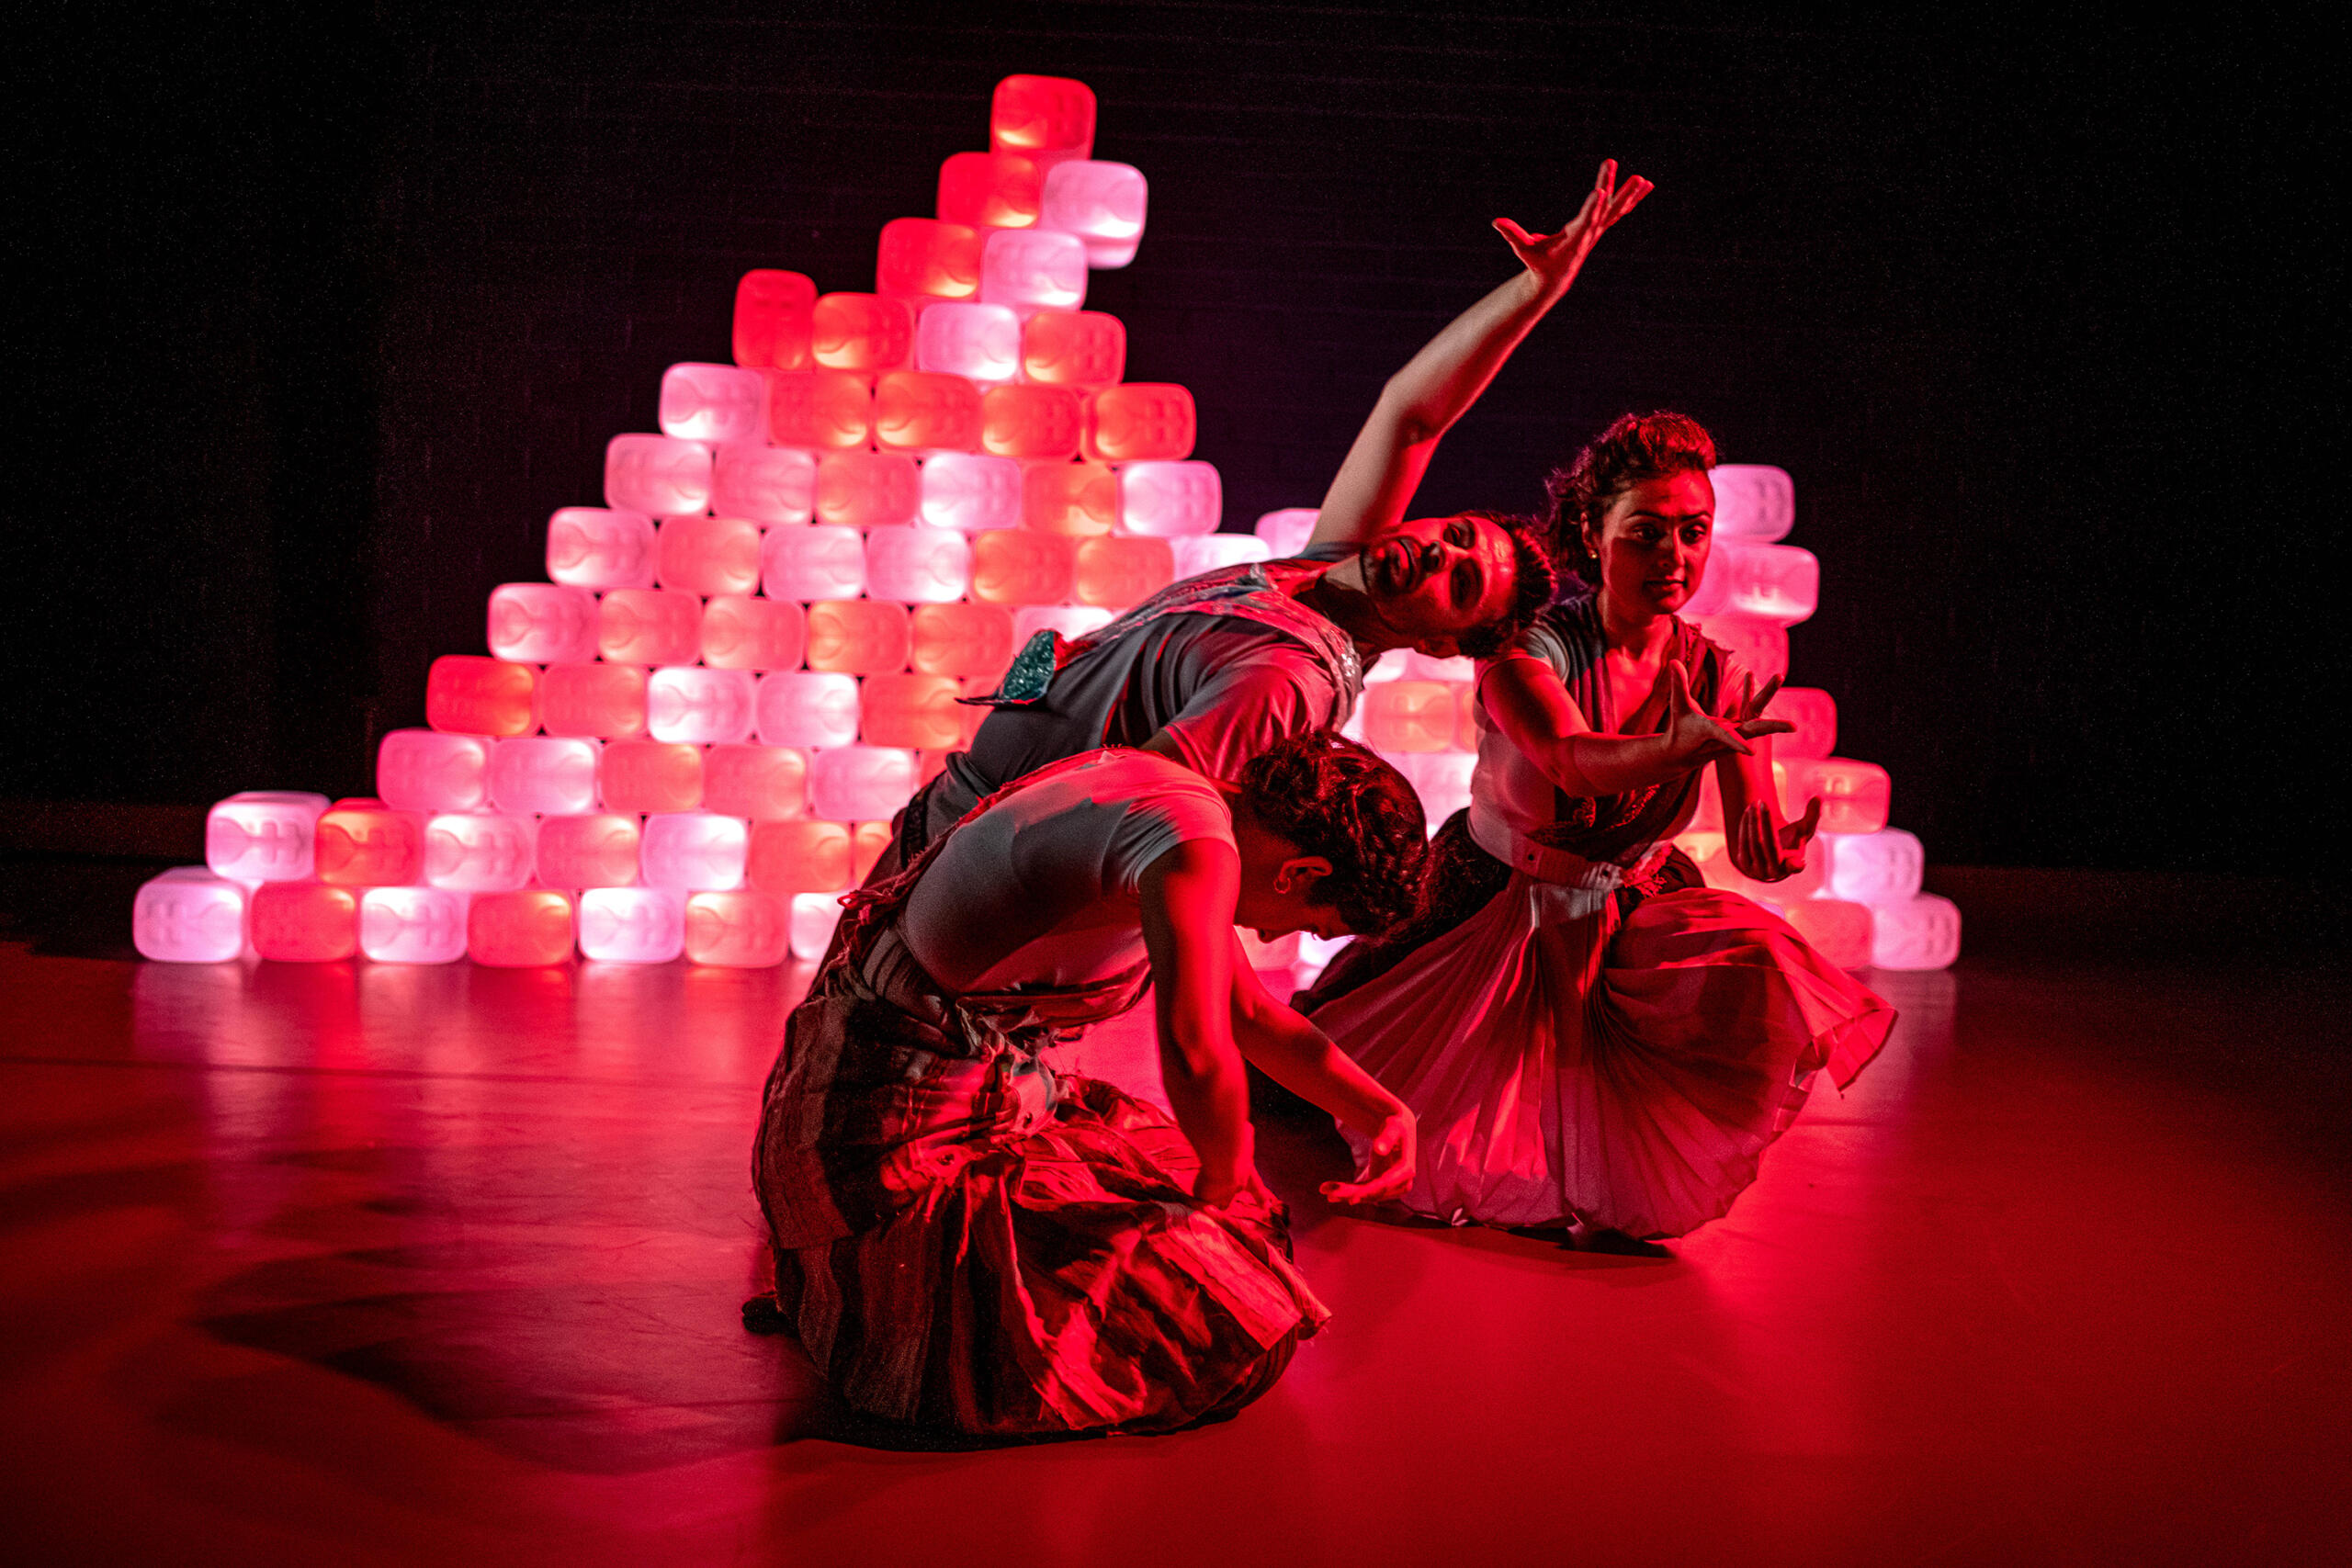 three bharatanatyam dancers striking a sitting pose under red light with a background of white plastic cans